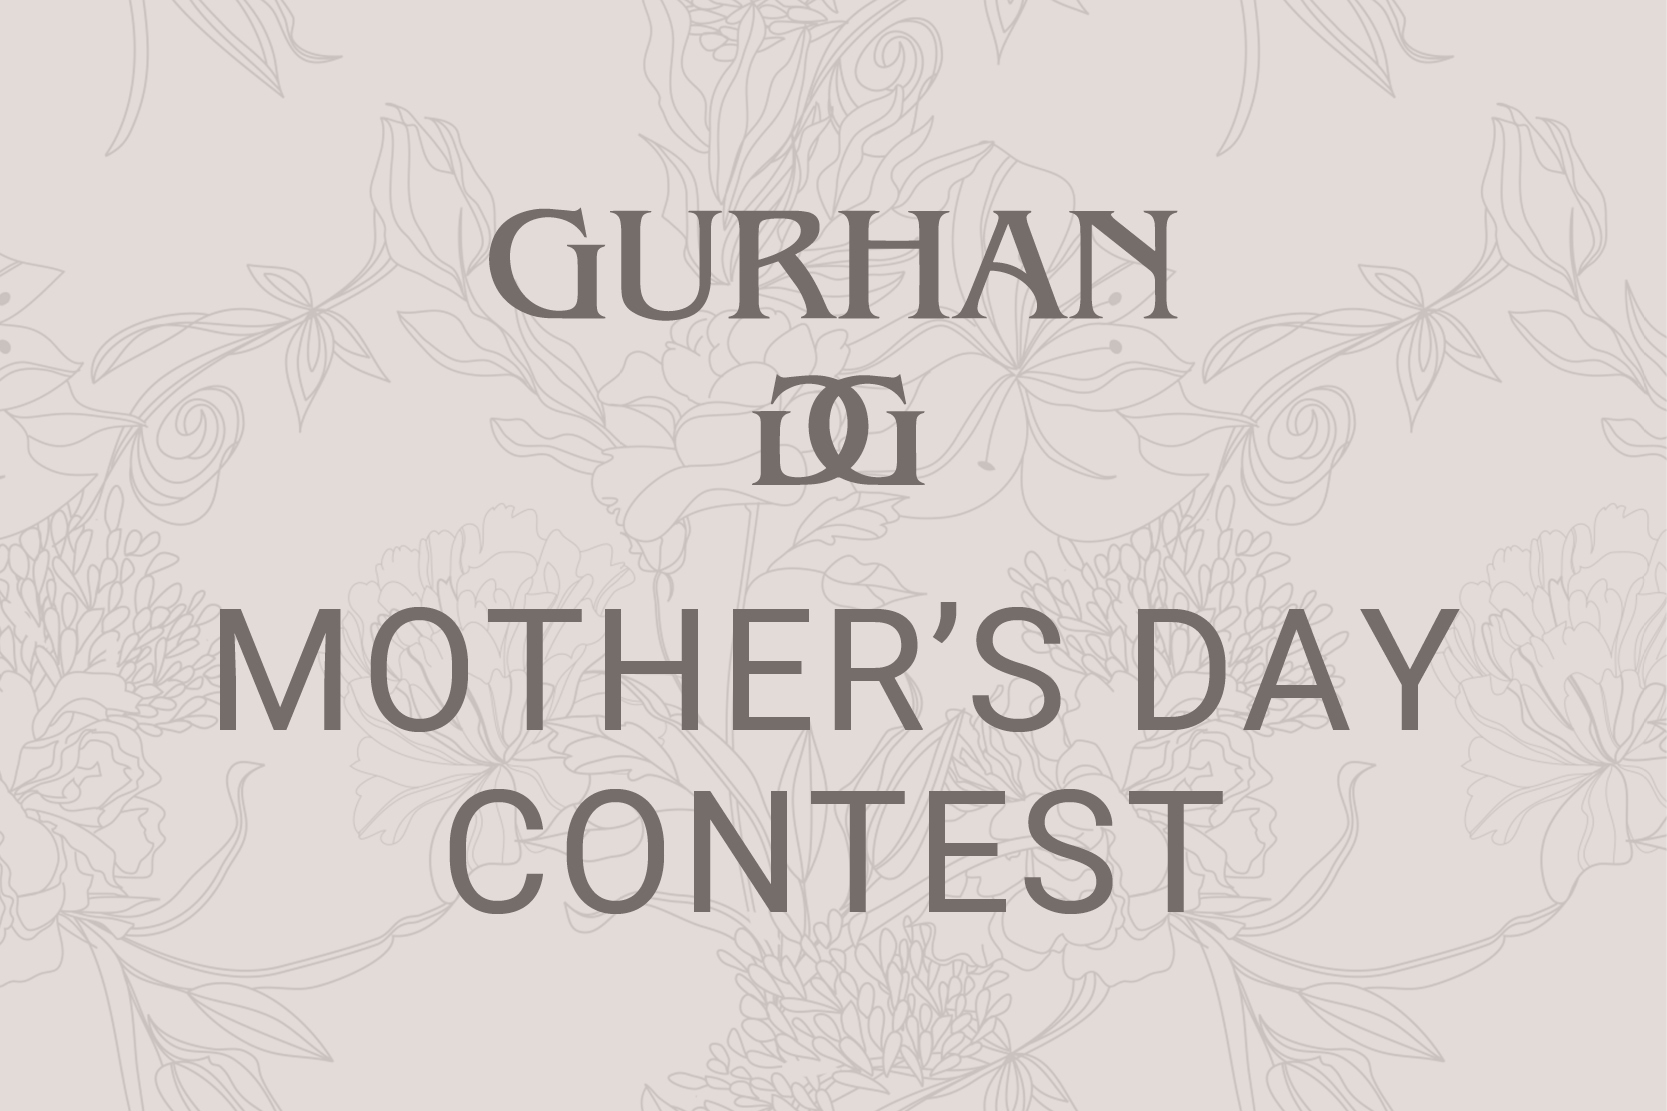 Gurhan Mother's Day Contest